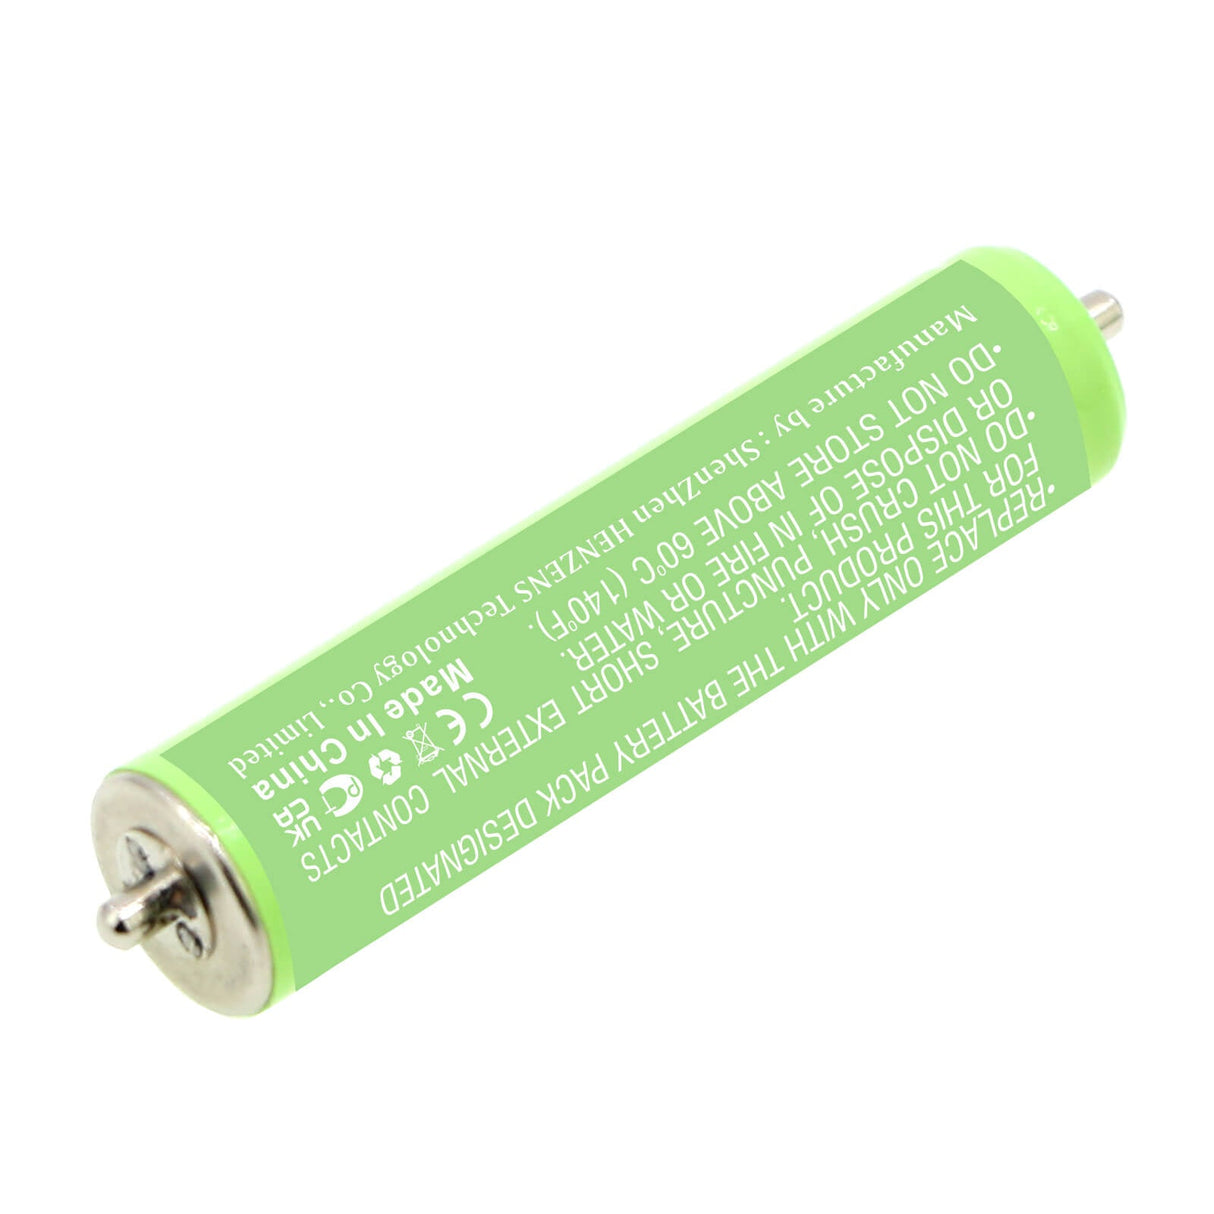 1.2v, Ni-mh, 700mah, Battery Fits Braun 1000, 10b, 0.84wh Batteries for Electronics Cameron Sino Technology Limited   